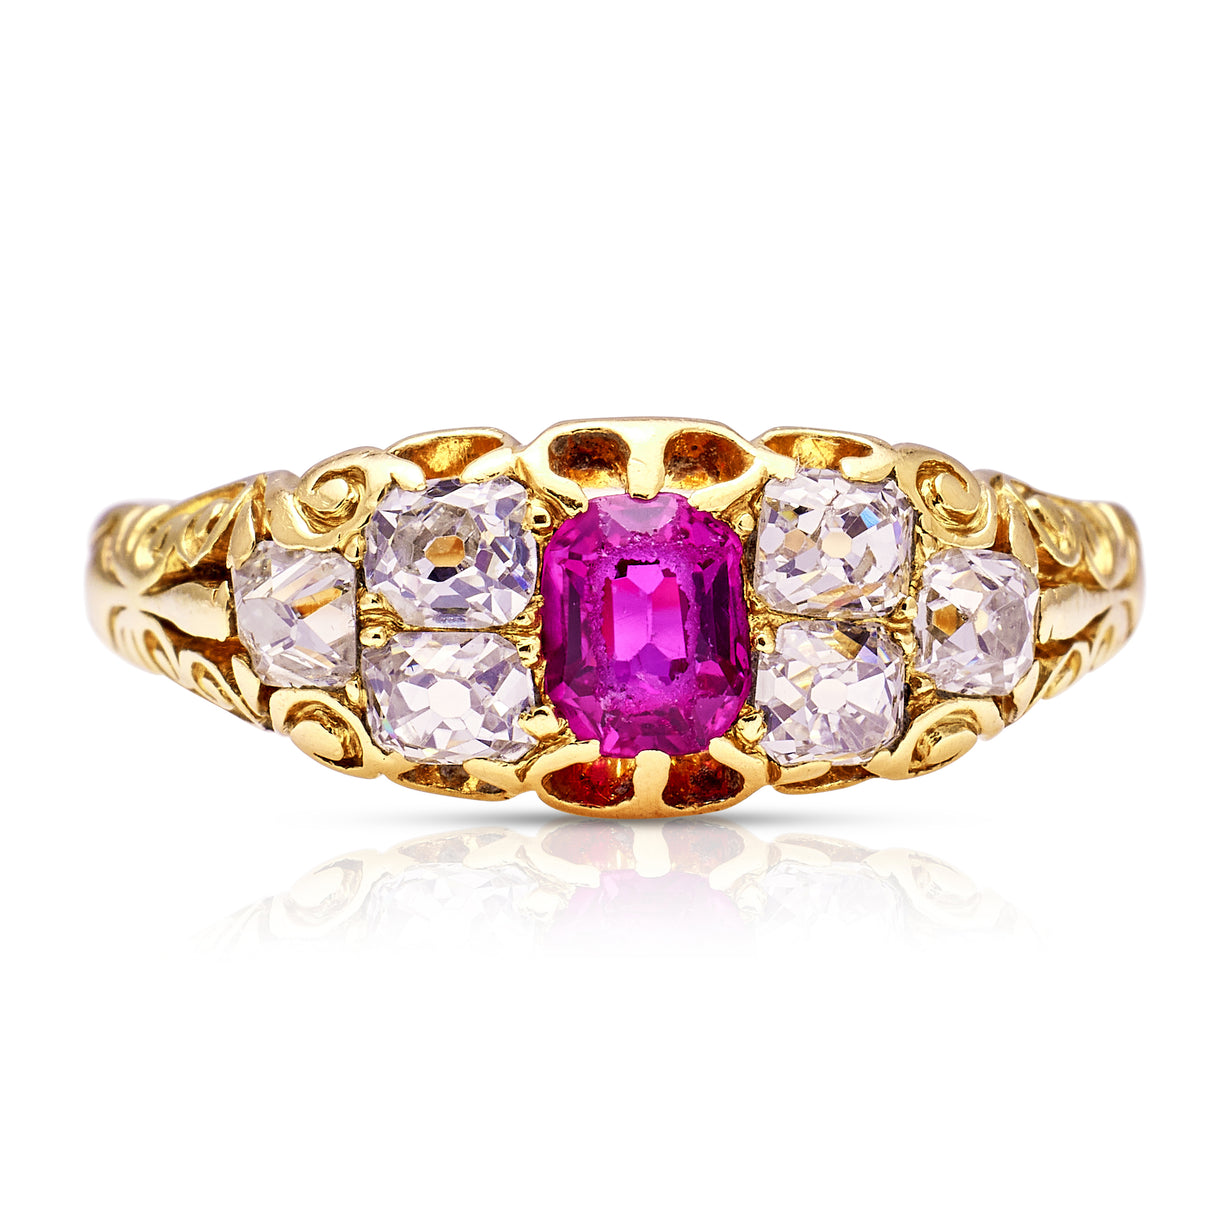 Antique, Victorian Burmese Ruby and Diamond Engagement Ring, 18ct Yellow Gold front view